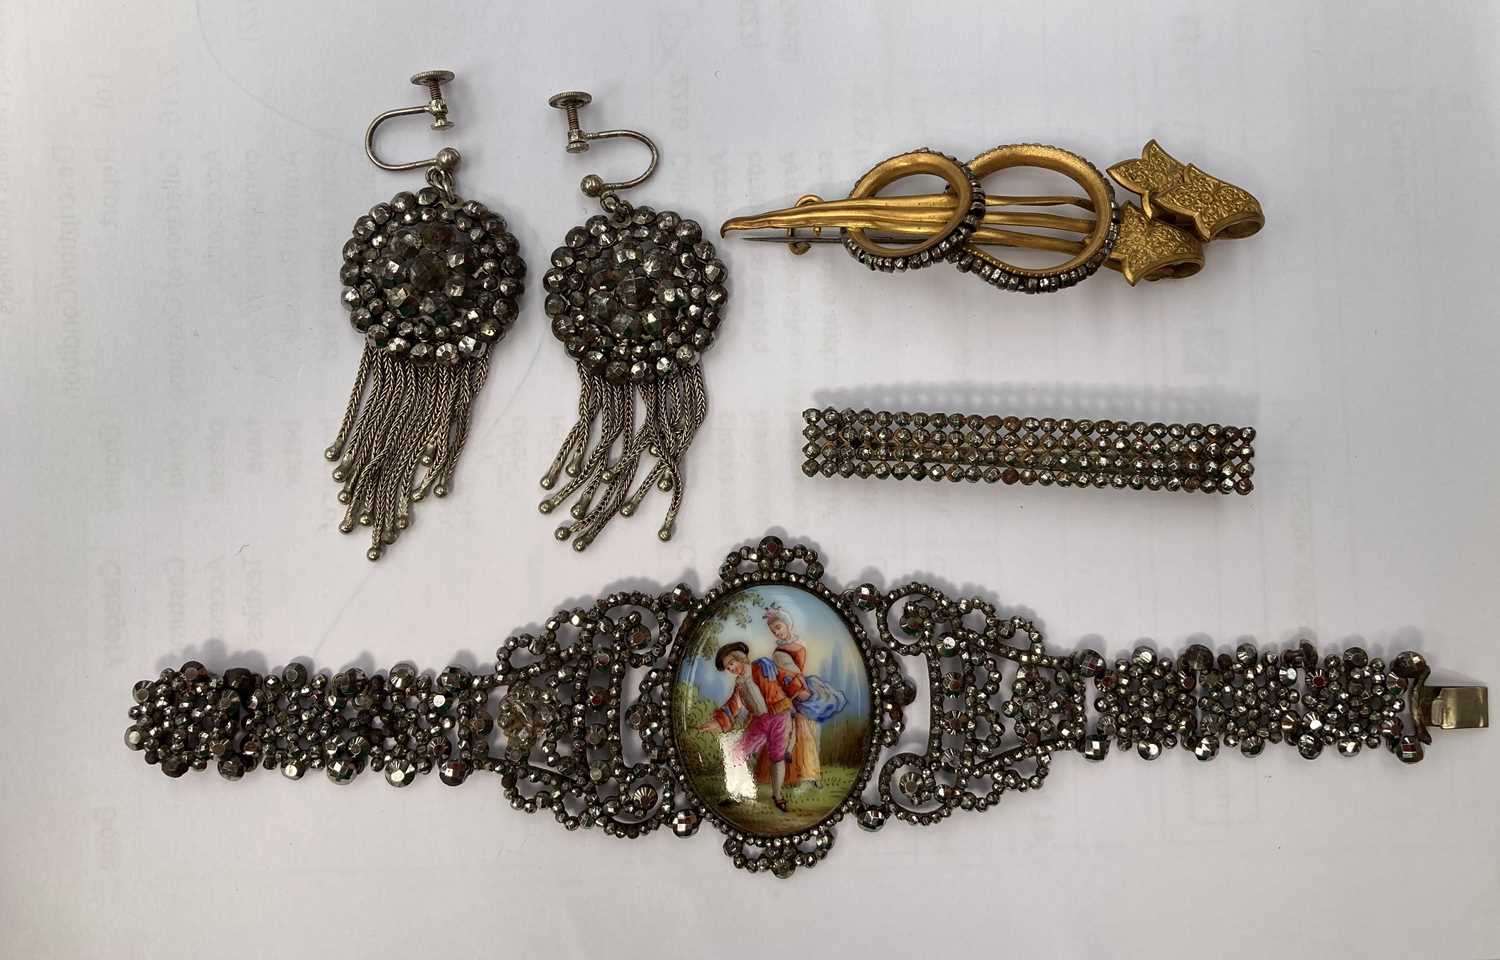 19th Century and Later Cut Steel Jewellery, comprising a decorative tiara with rotating flower heads - Image 9 of 19